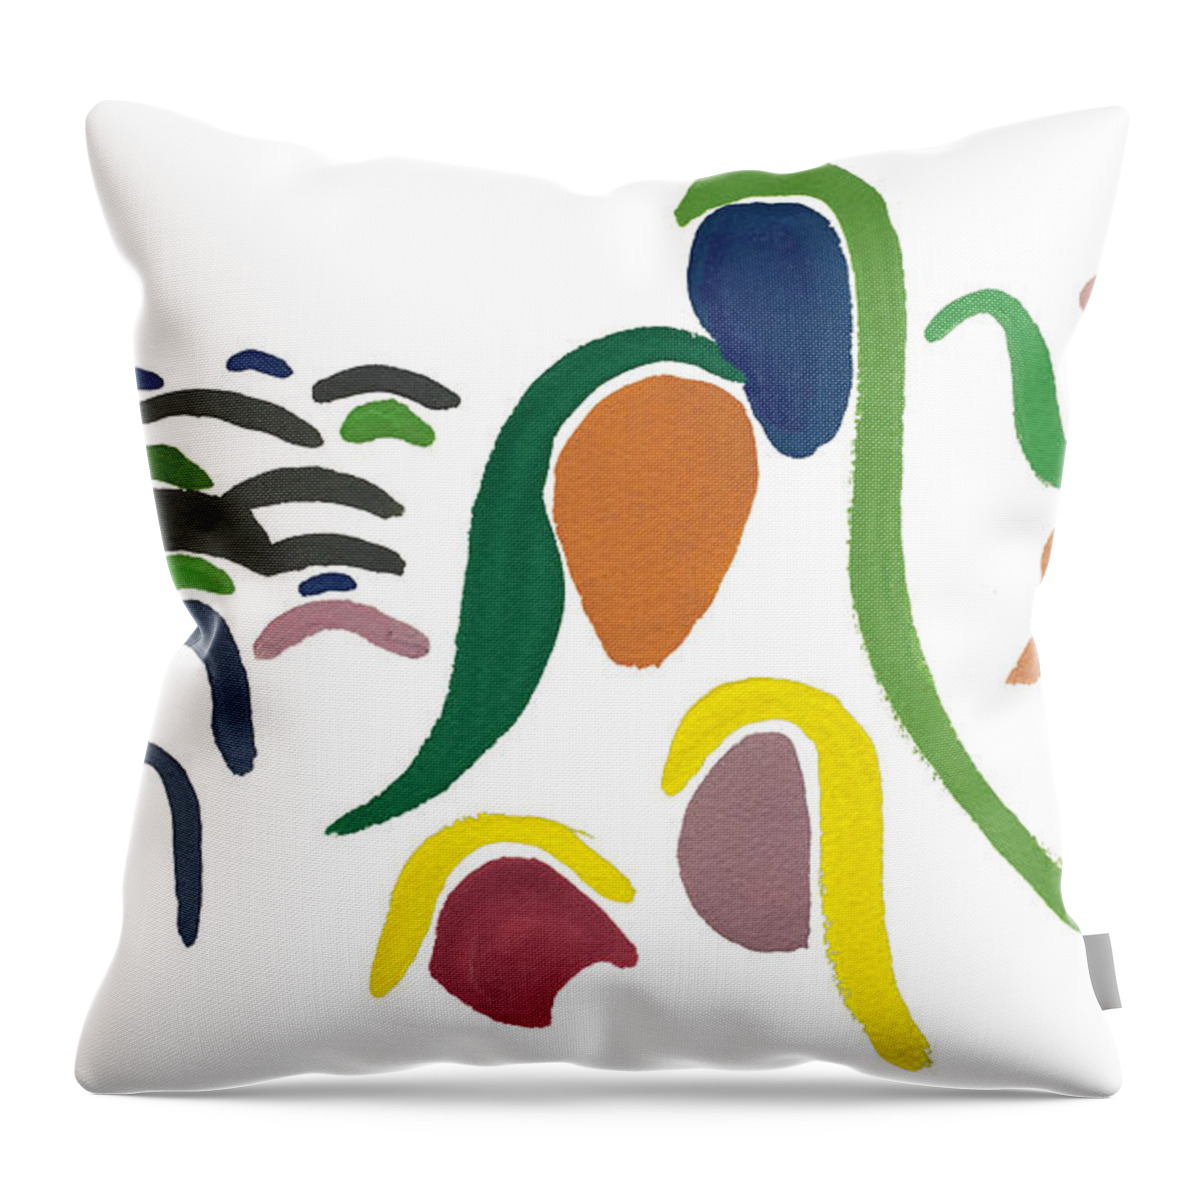 Contemporary Throw Pillow featuring the painting Generations by Bjorn Sjogren